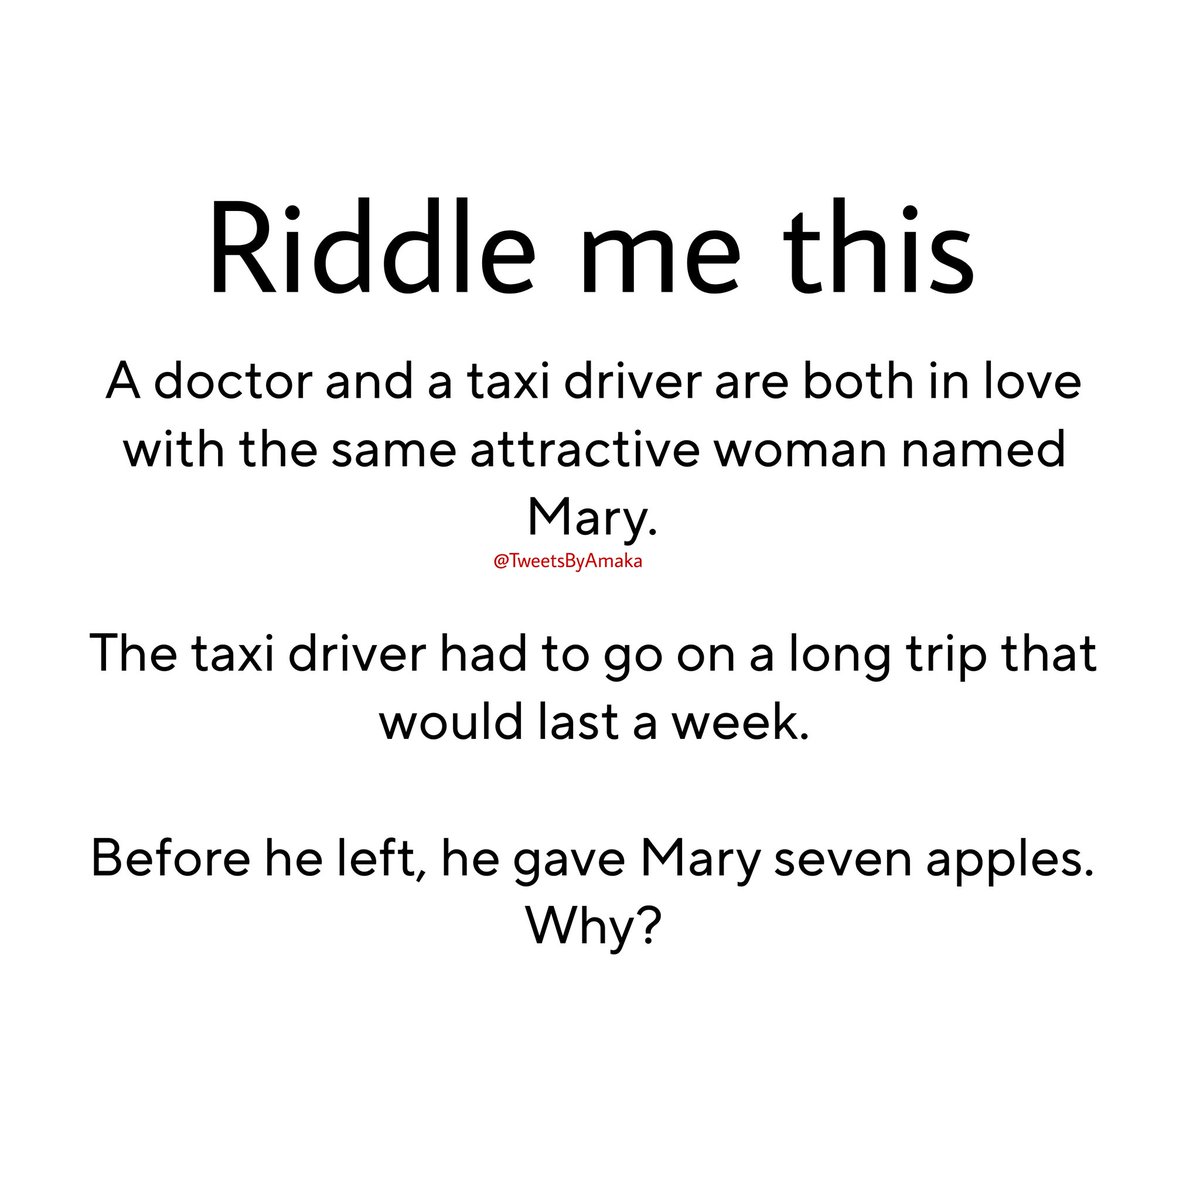 Riddle me this Hint: it's a saying